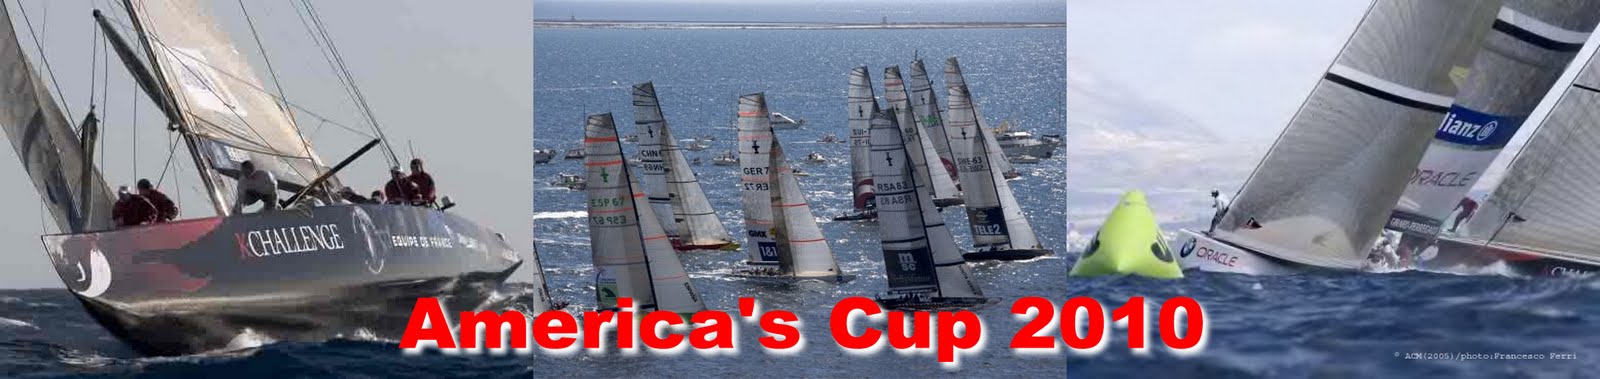 America's Cup 2010